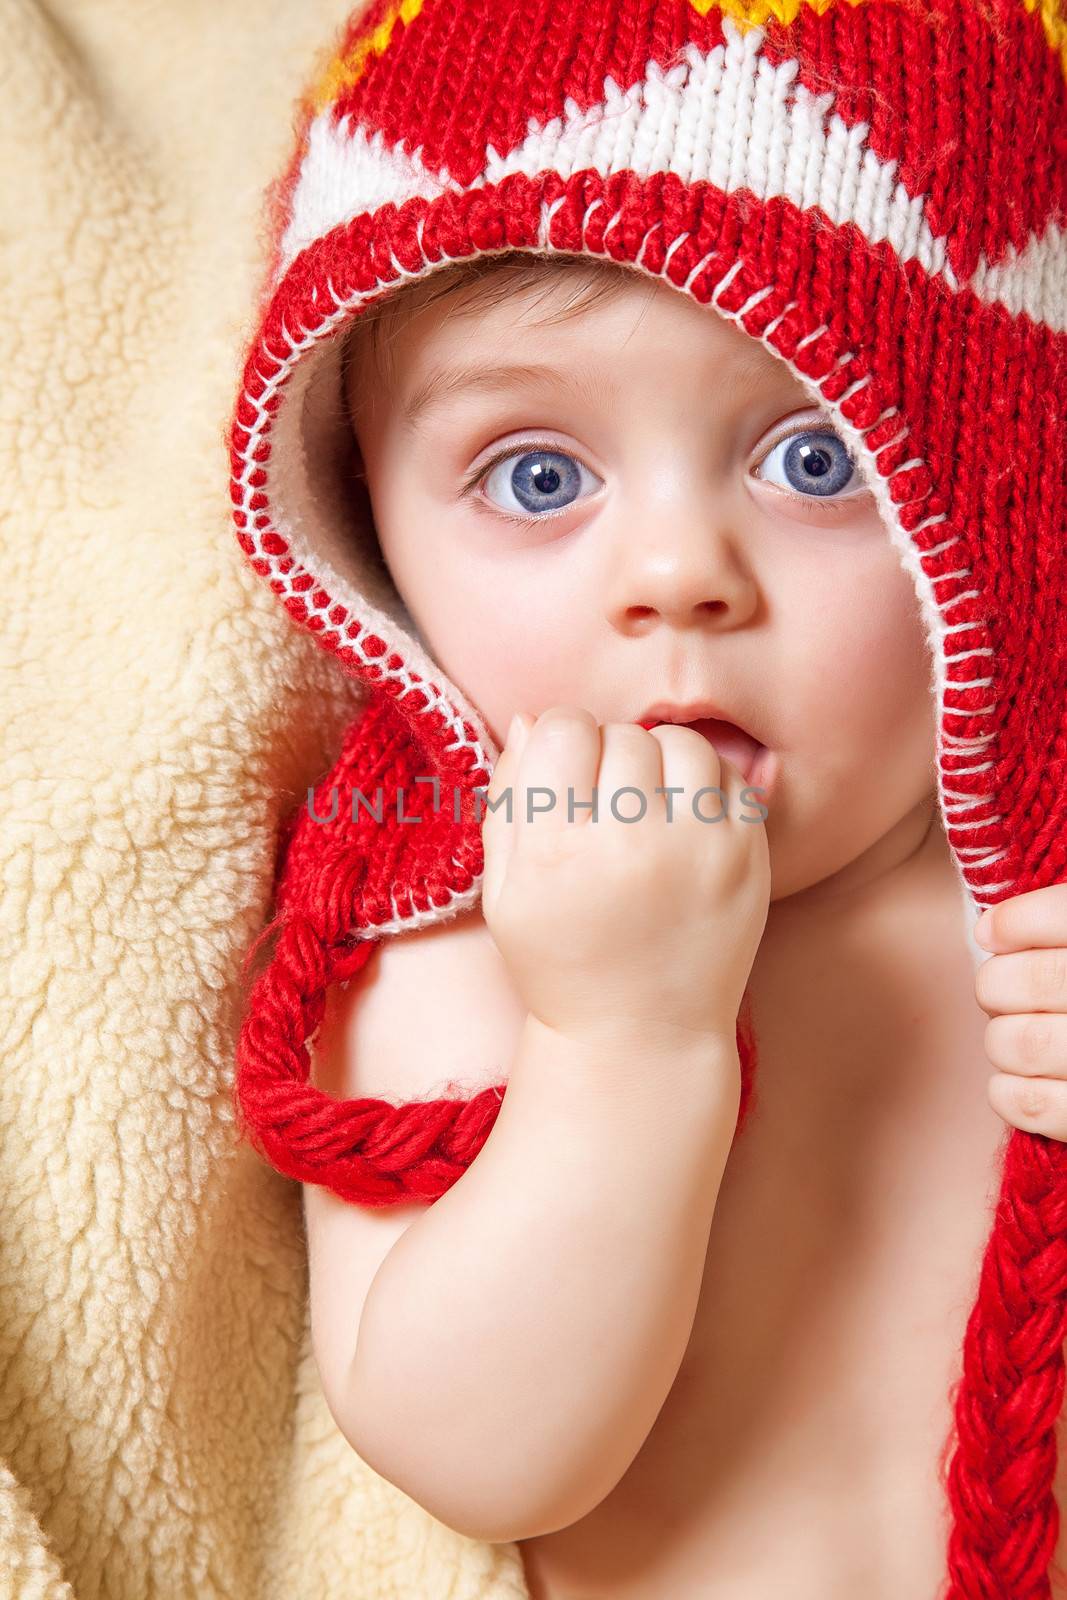 Baby in red bonnet by dynamicfoto